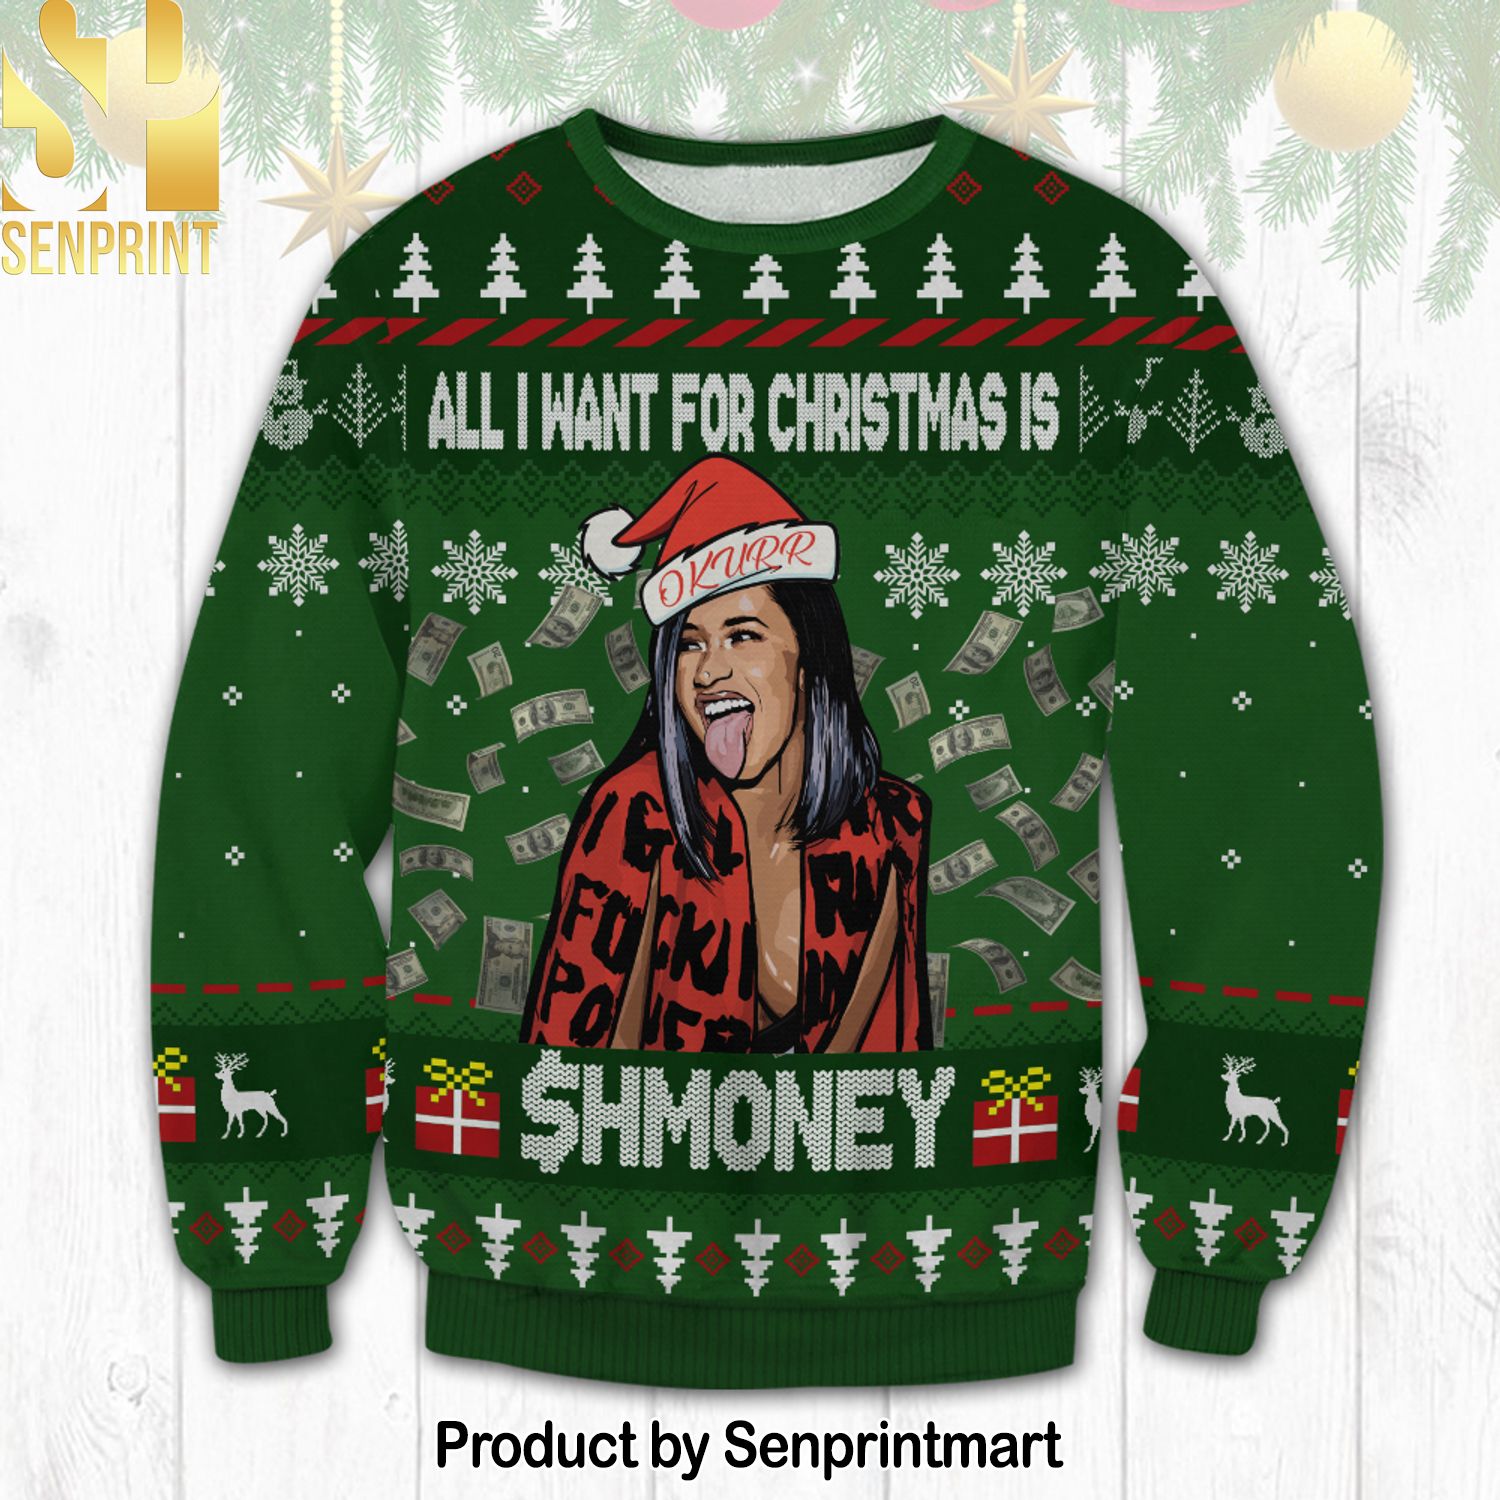 Cardi B Meme For Christmas Gifts Ugly Christmas Wool Knitted Sweater